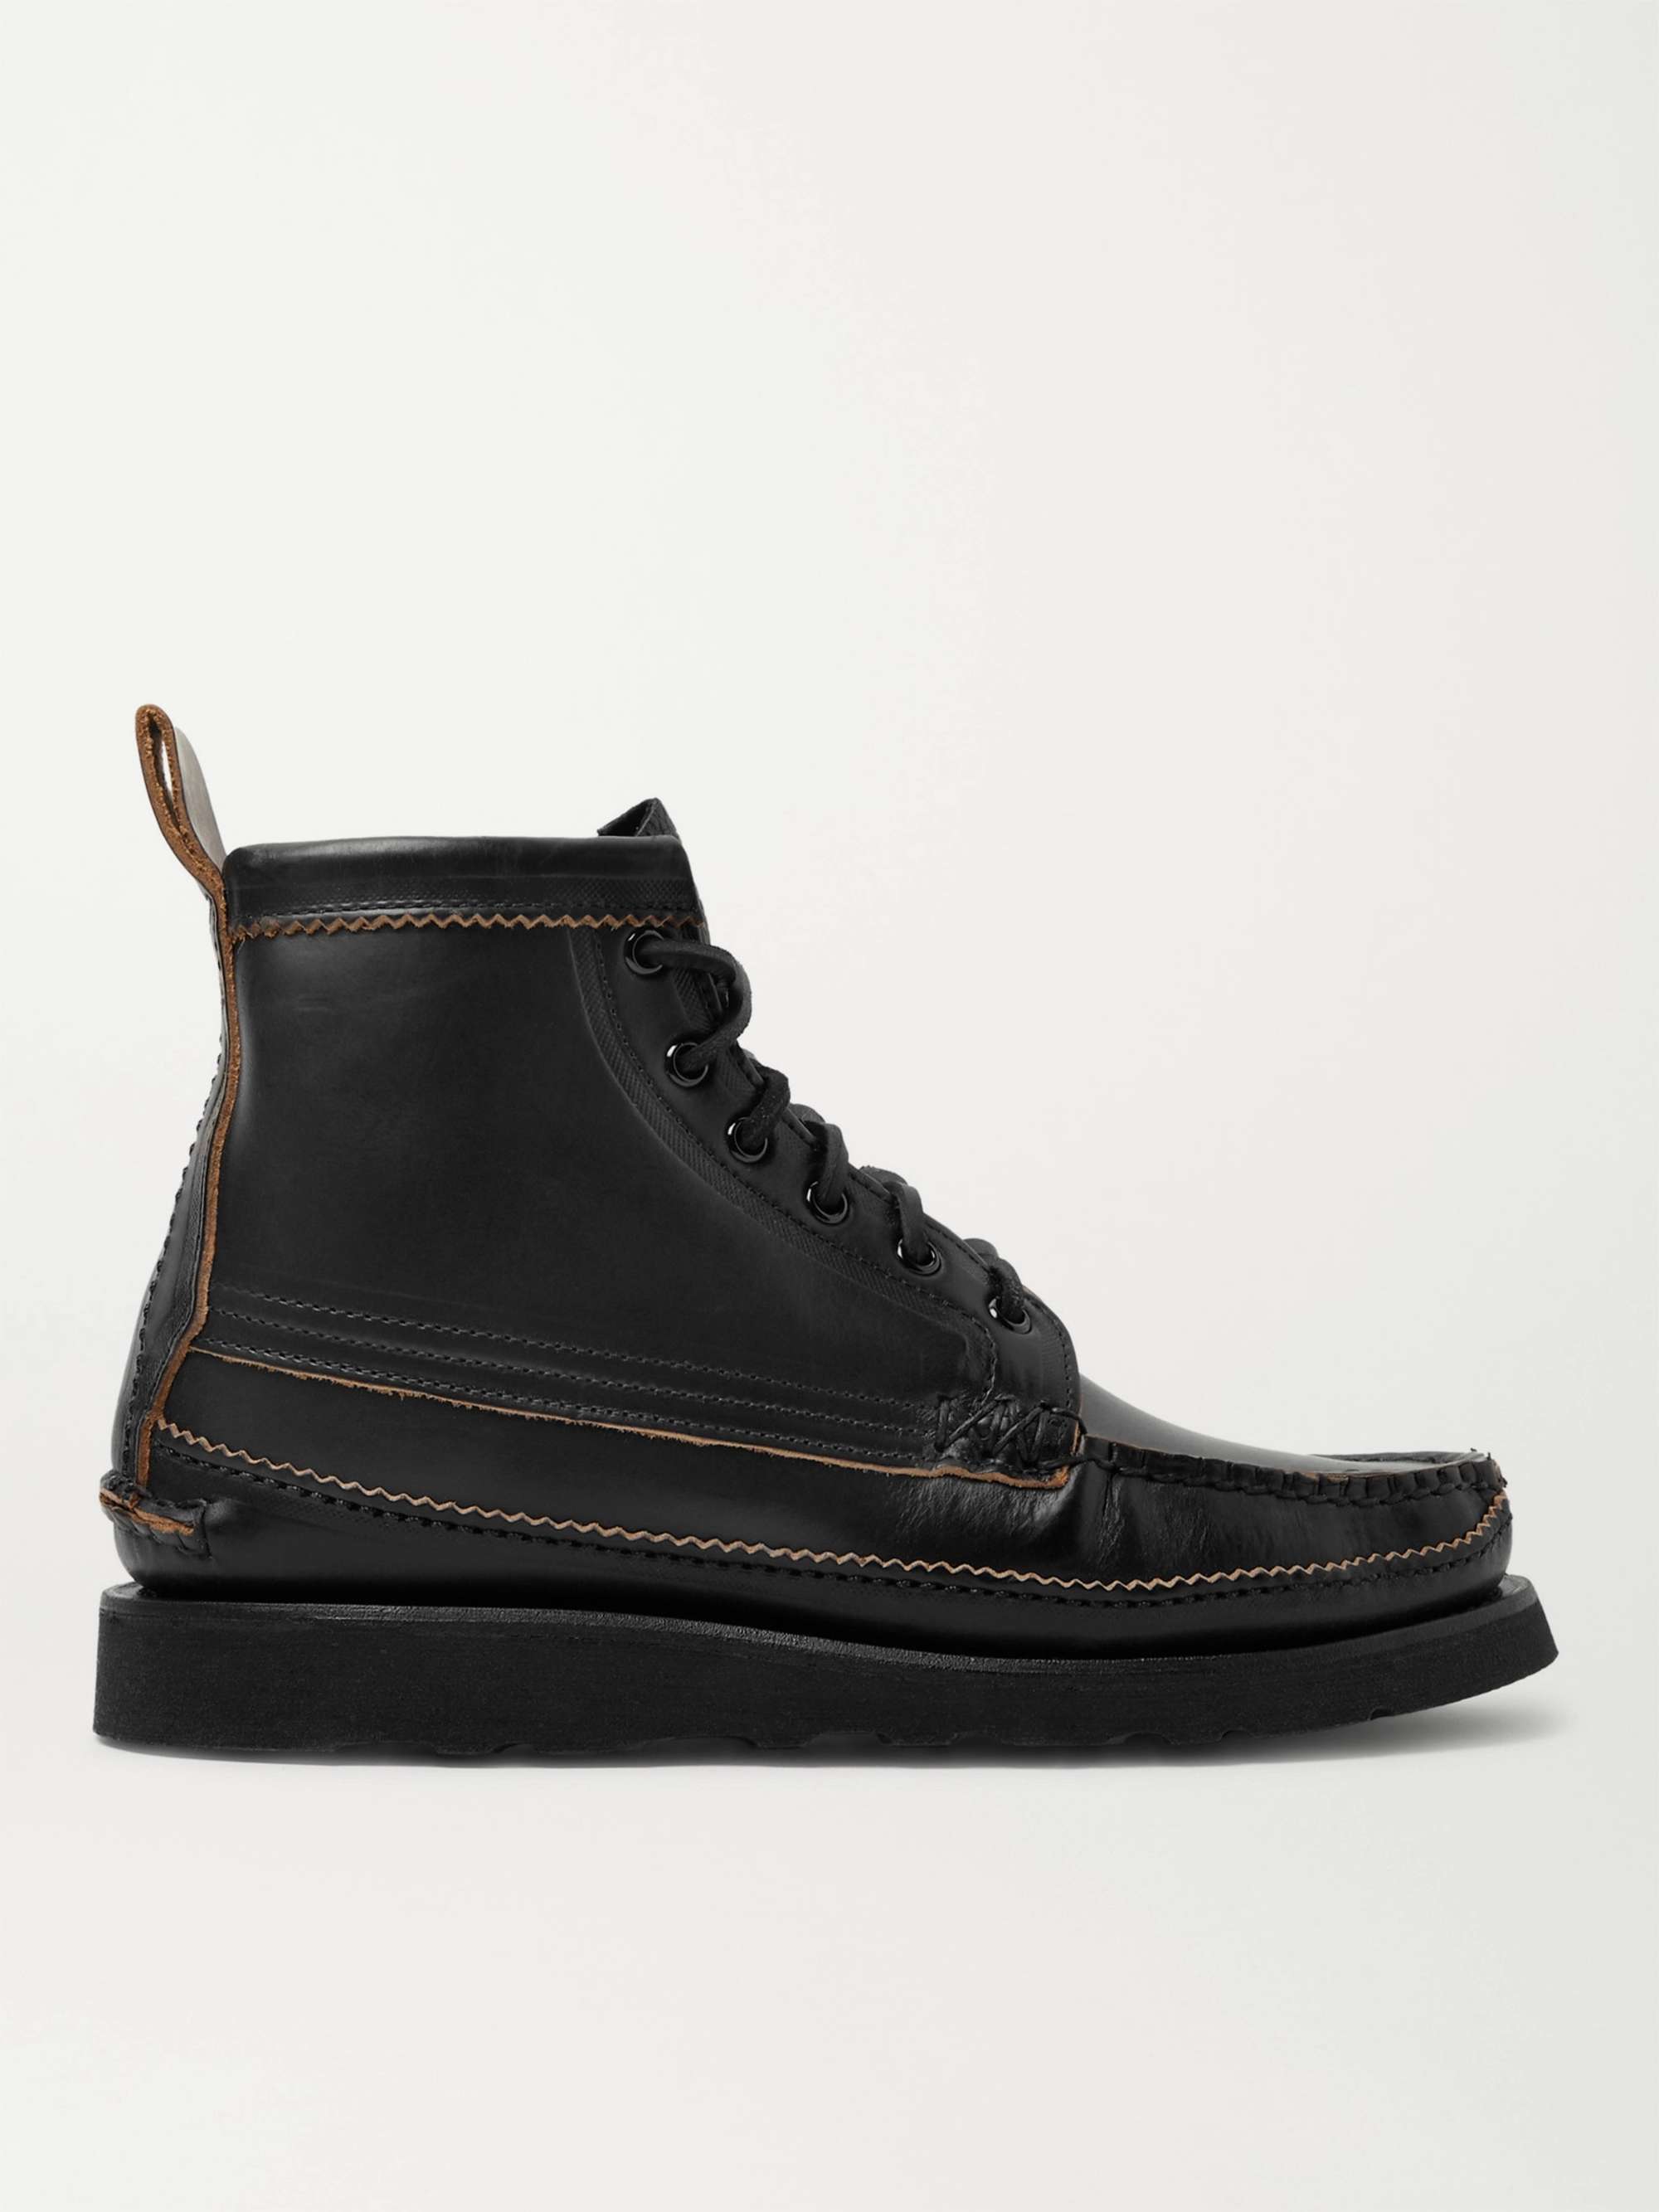 YUKETEN Maine Guide 6 Eye Smooth and Full-Grain Leather Boots